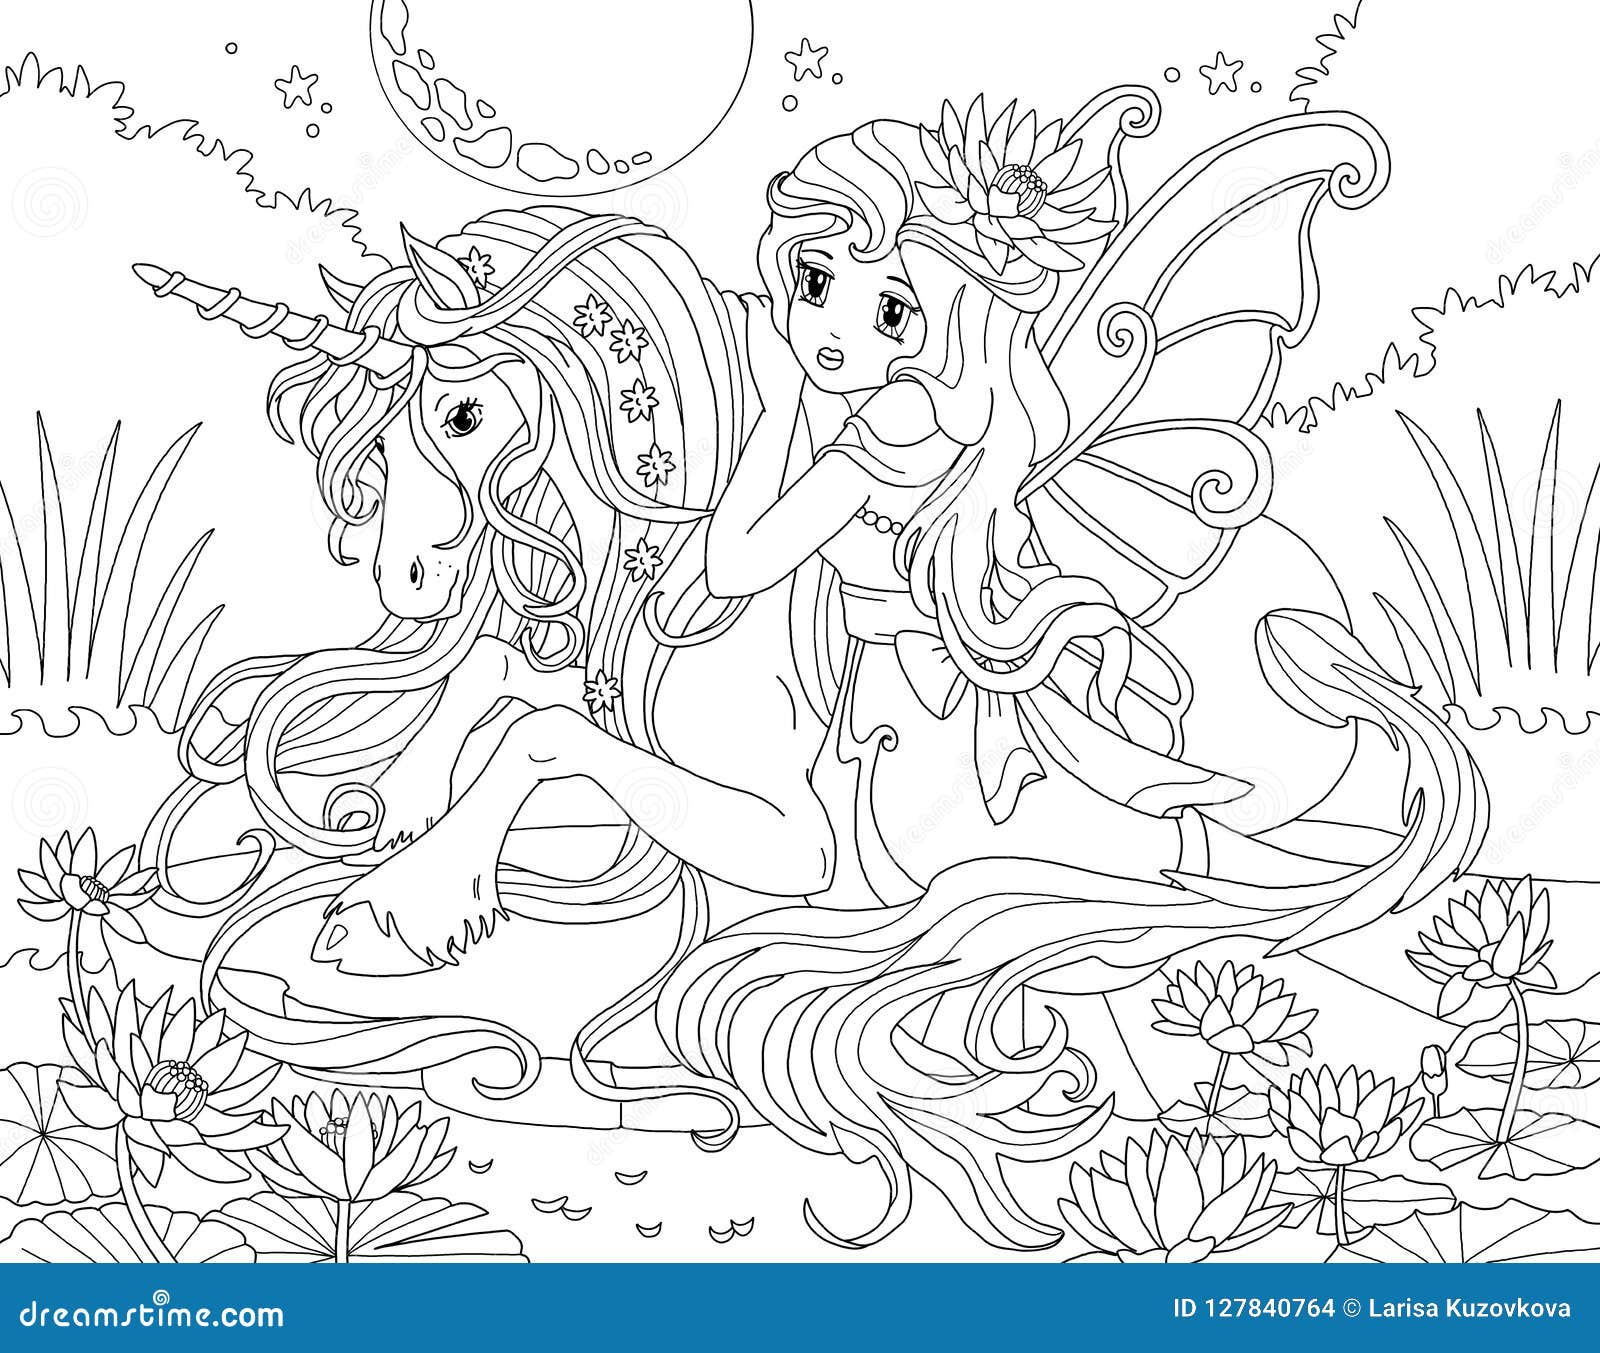 Coloring Page the Unicorn and Princess Stock Illustration ...